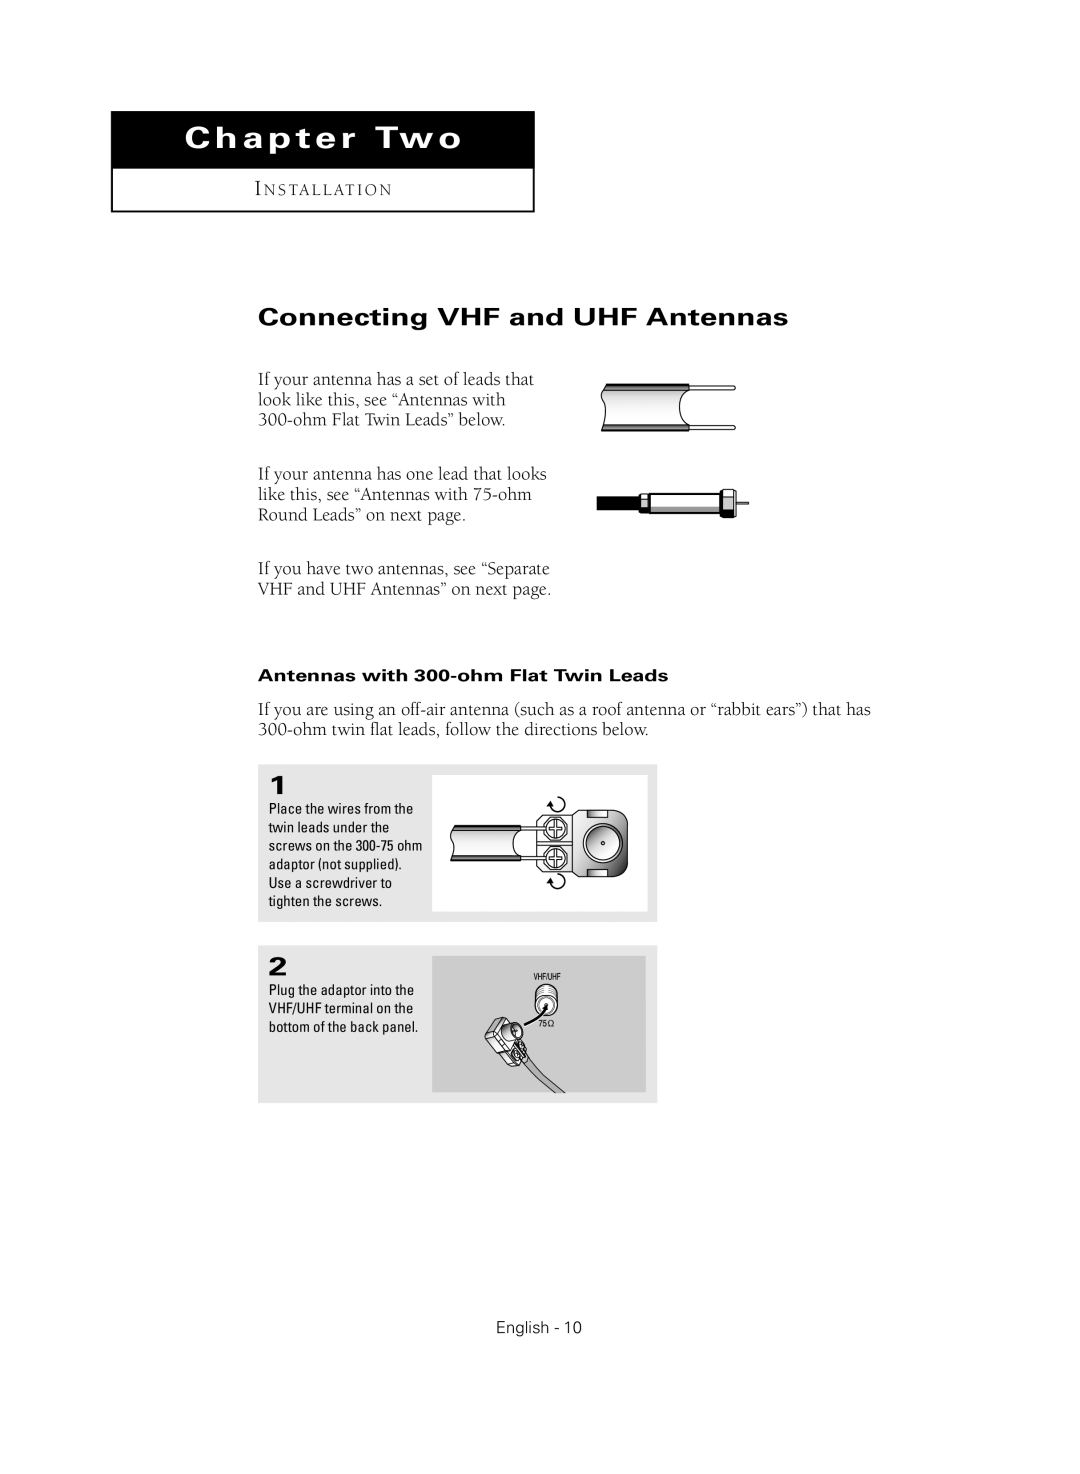 Samsung TX-R2735G manual Chapter Two, Connecting VHF and UHF Antennas 